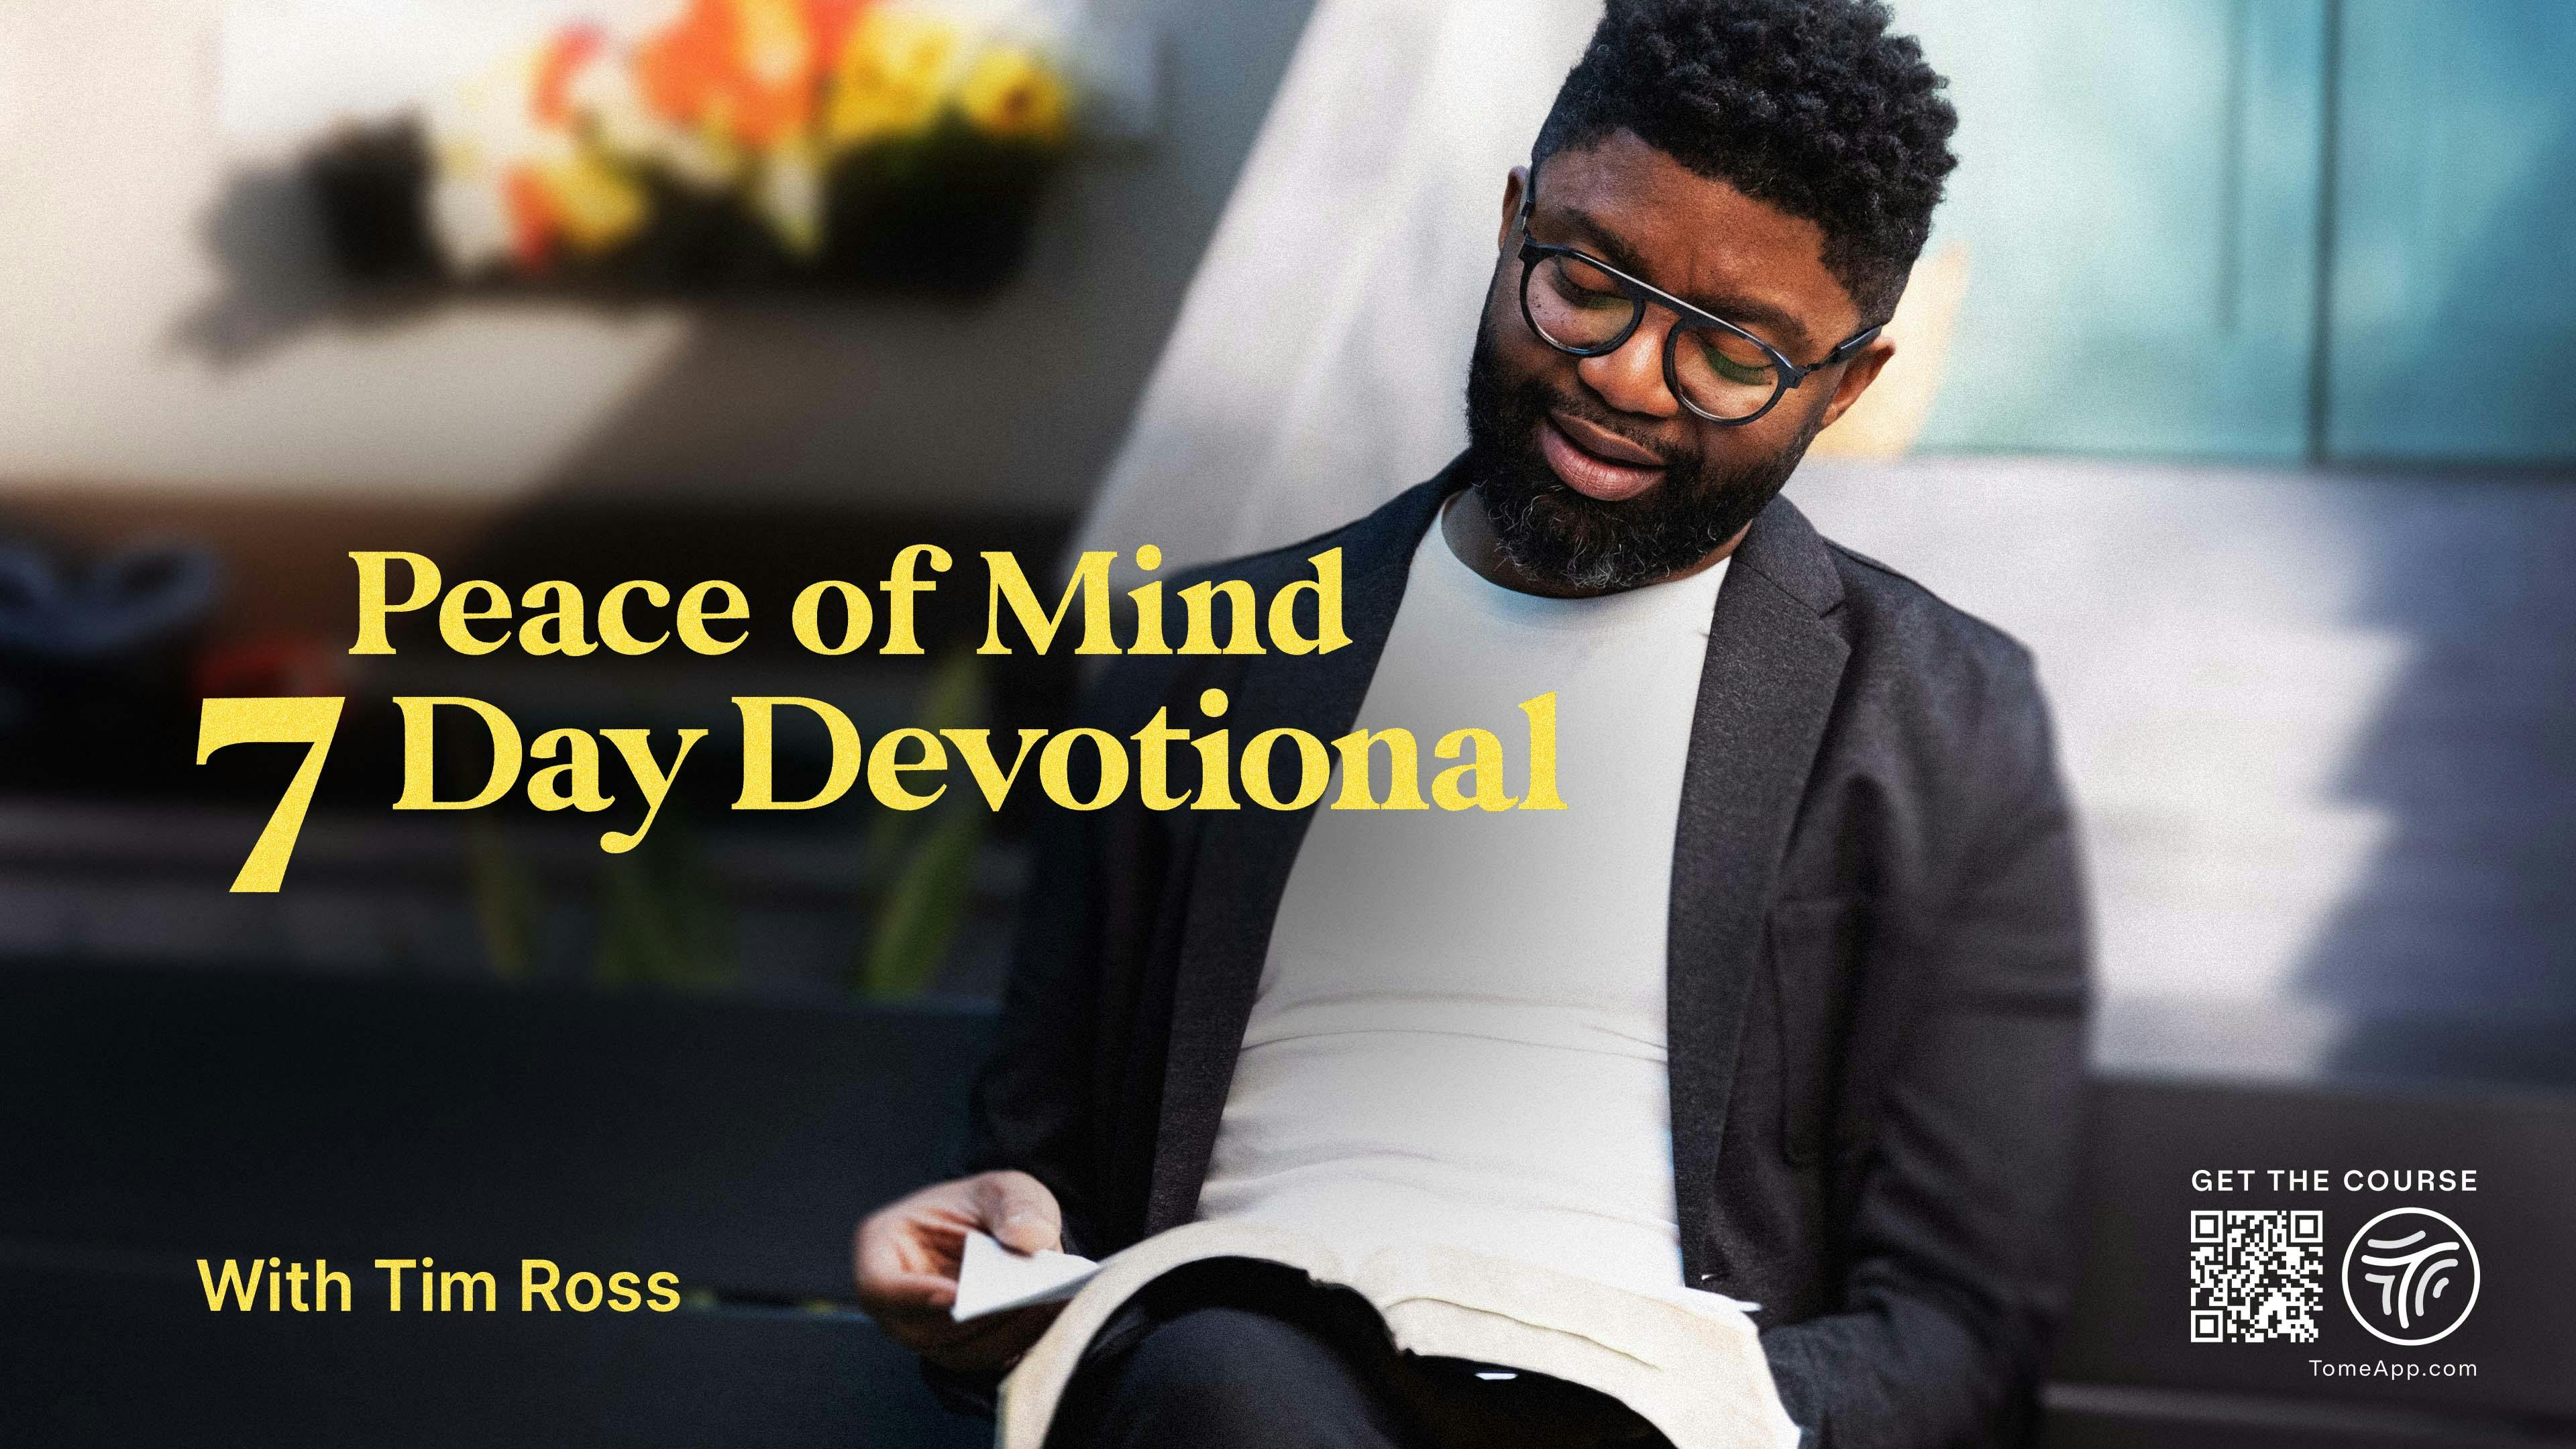 Peace of Mind: 7 Day Devotional